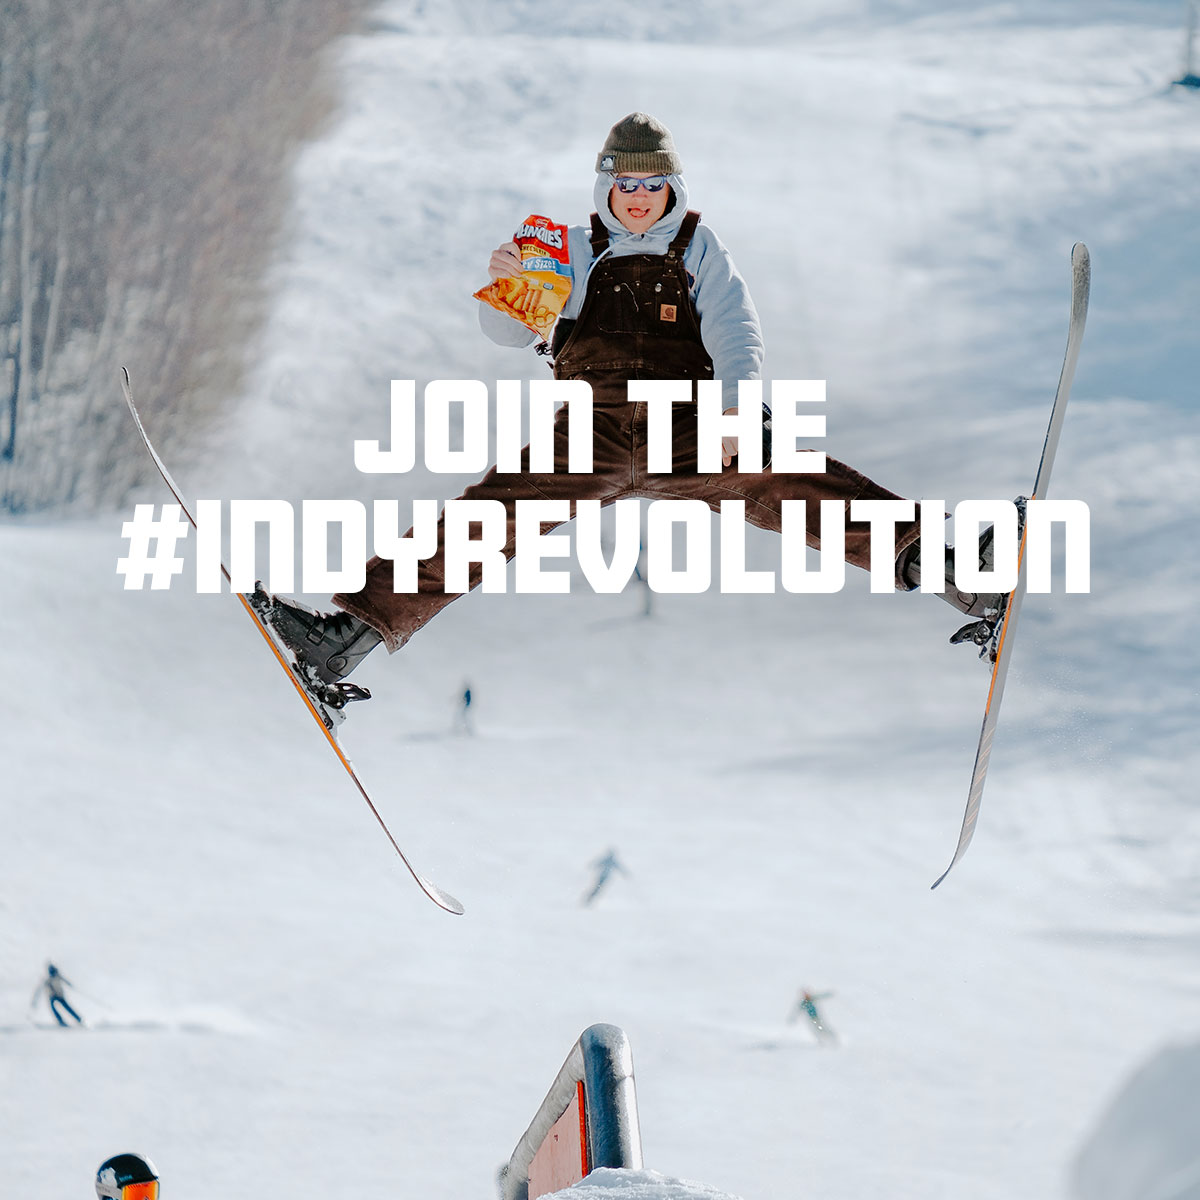 Indy Revolution hashtag with skiers